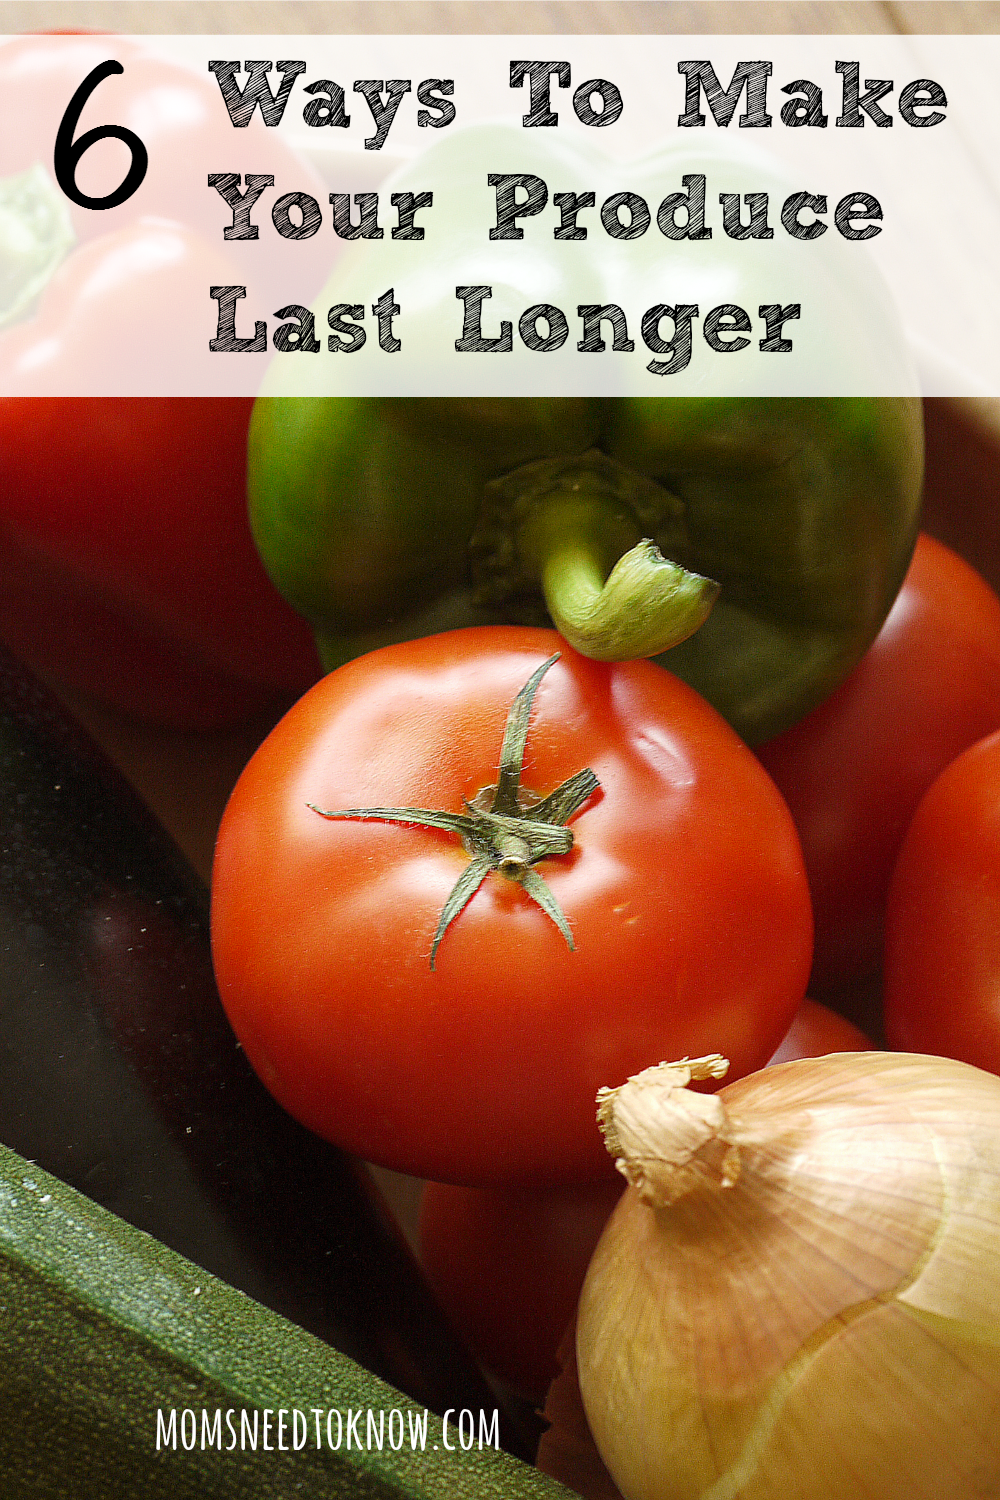 If you find yourself throwing out produce that seems to spoil too quickly, you will want to check out these ways to make your produce last longer!